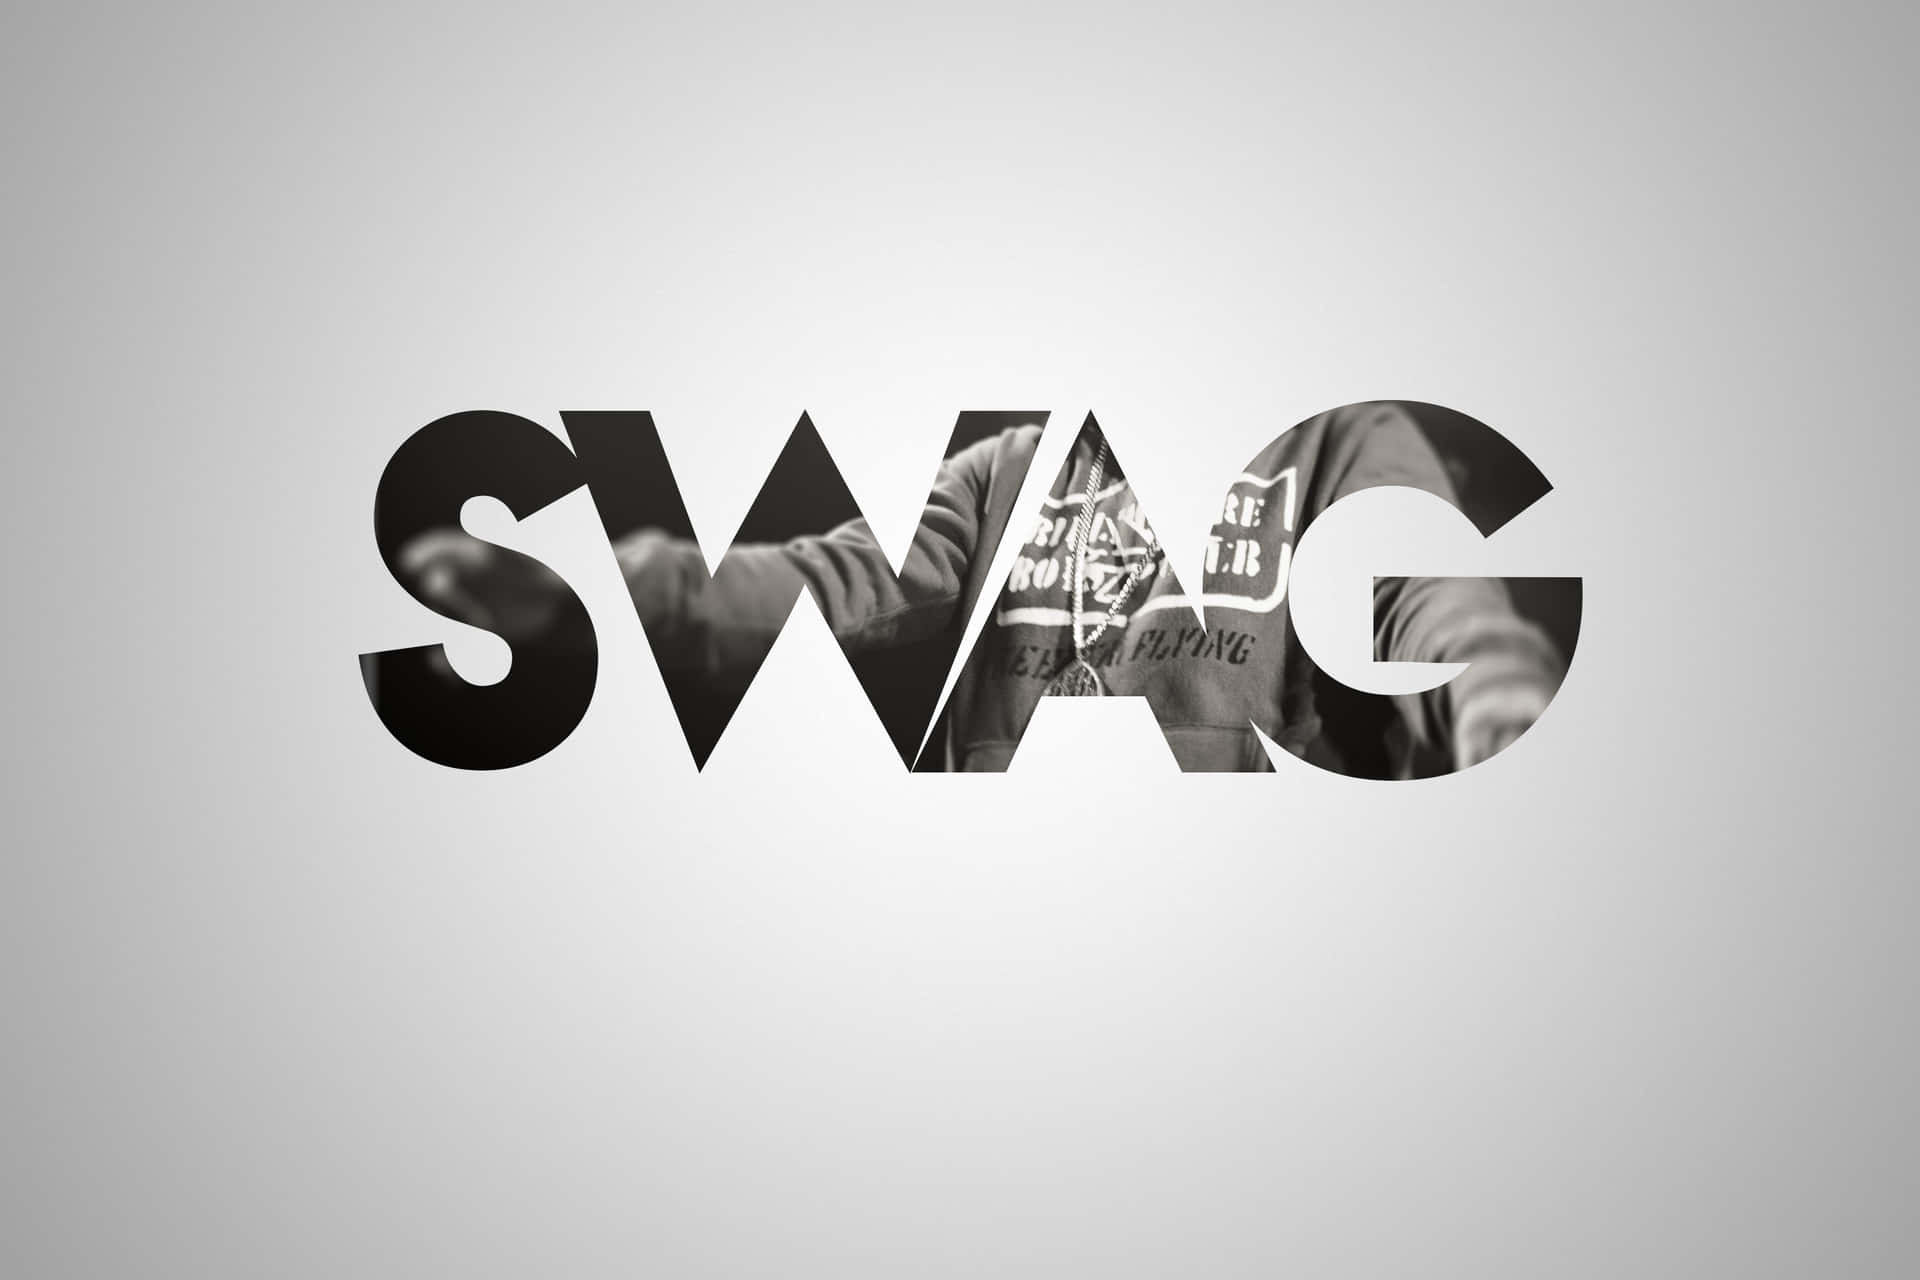 Cool Swag Lettering Wallpaper